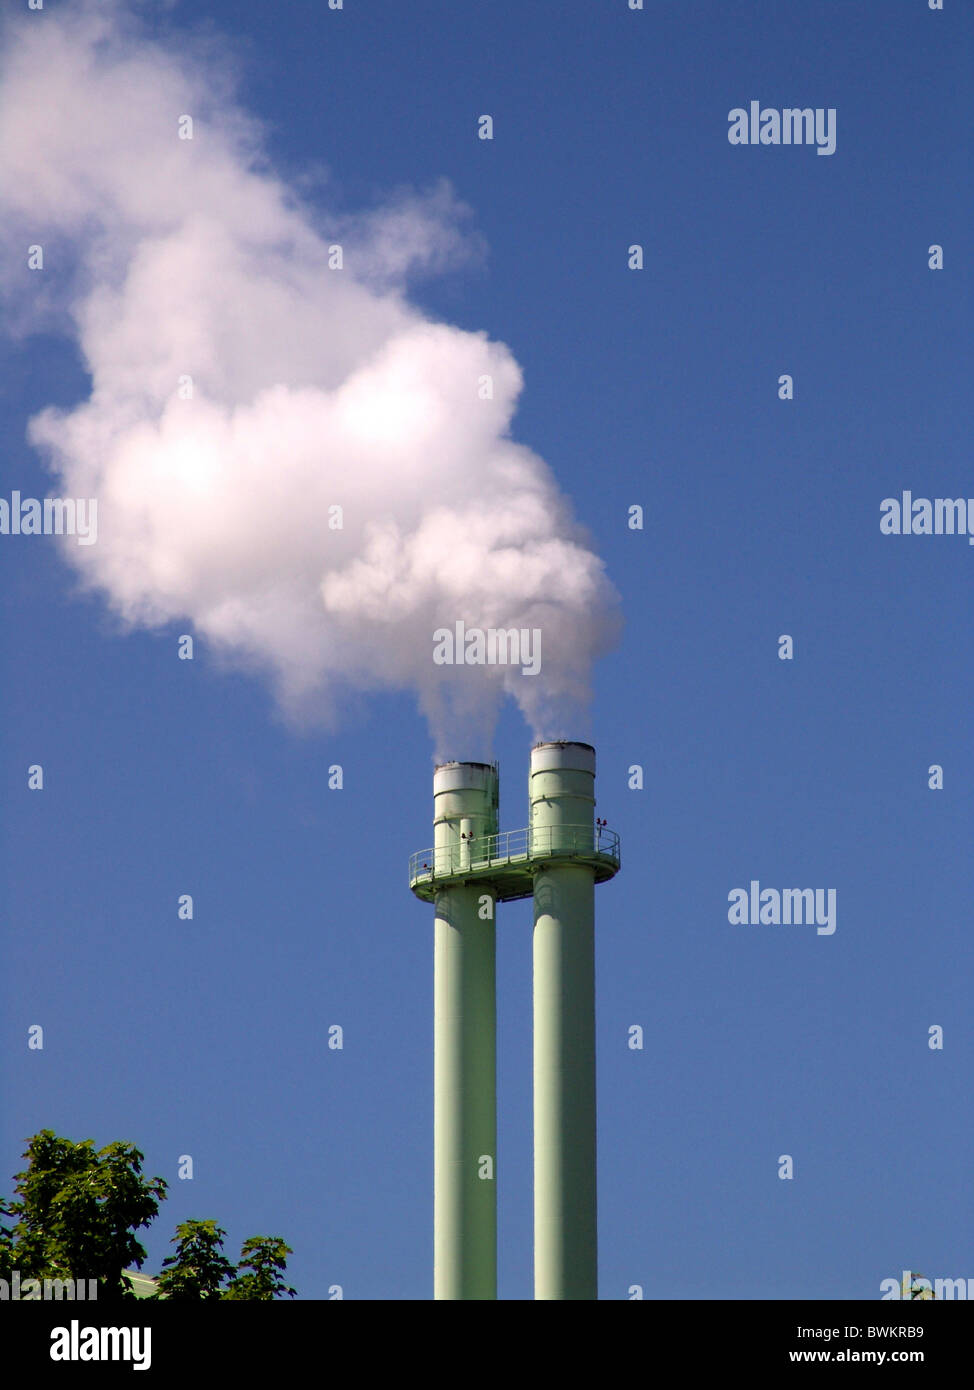 Chimney Fireplace Smoke Waste Gases Environment Environmental Pollution